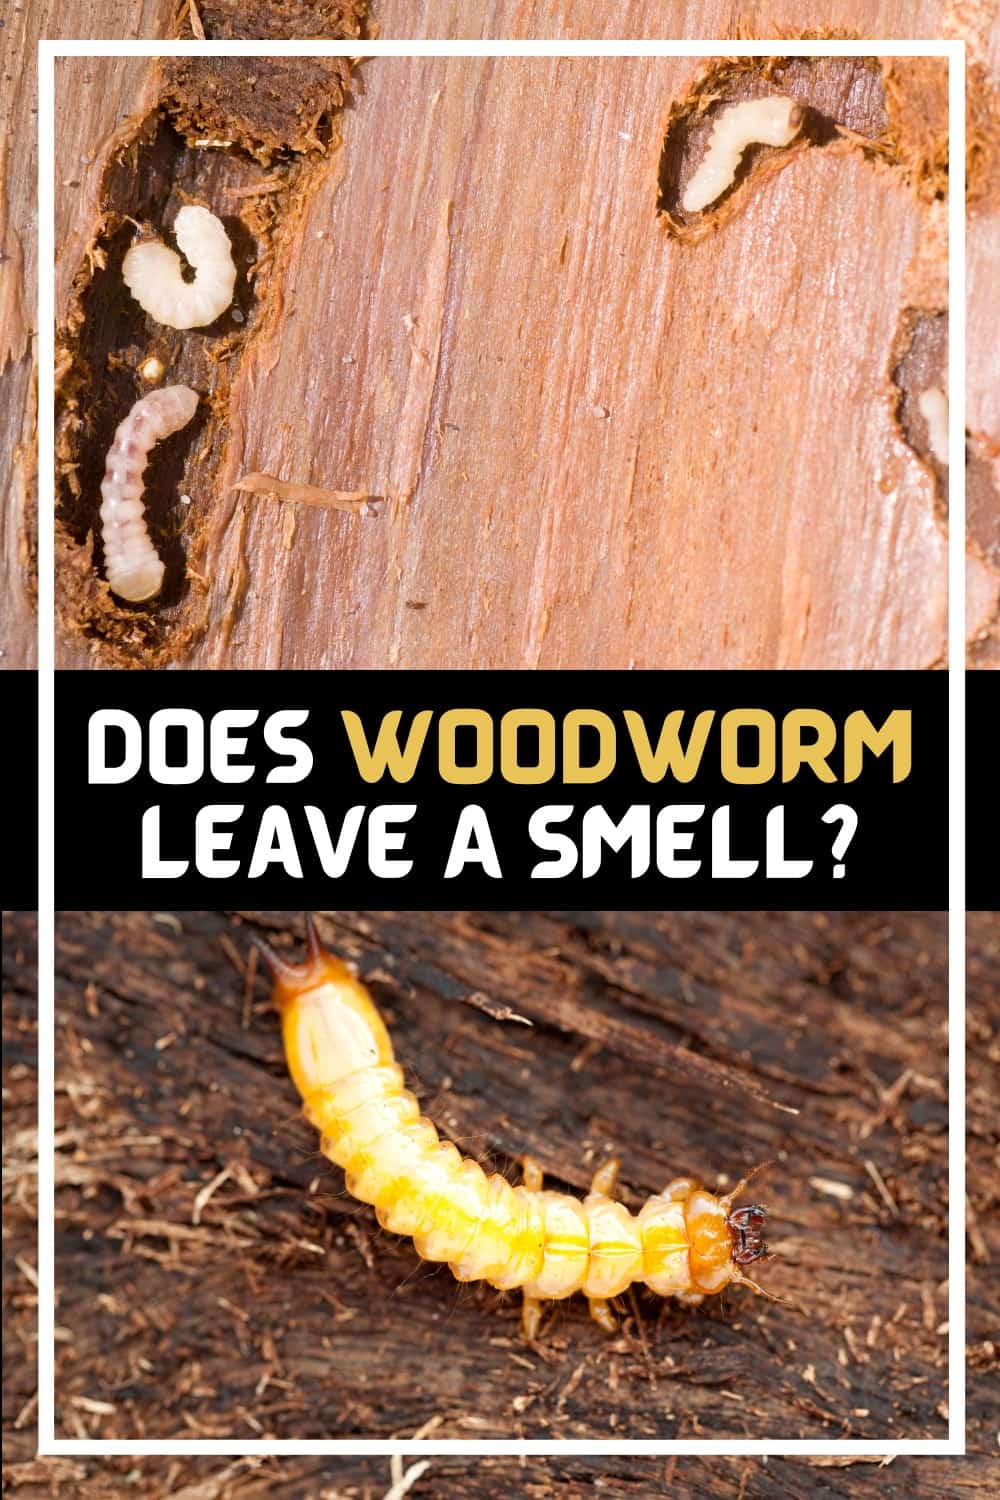 Woodworm does not smell